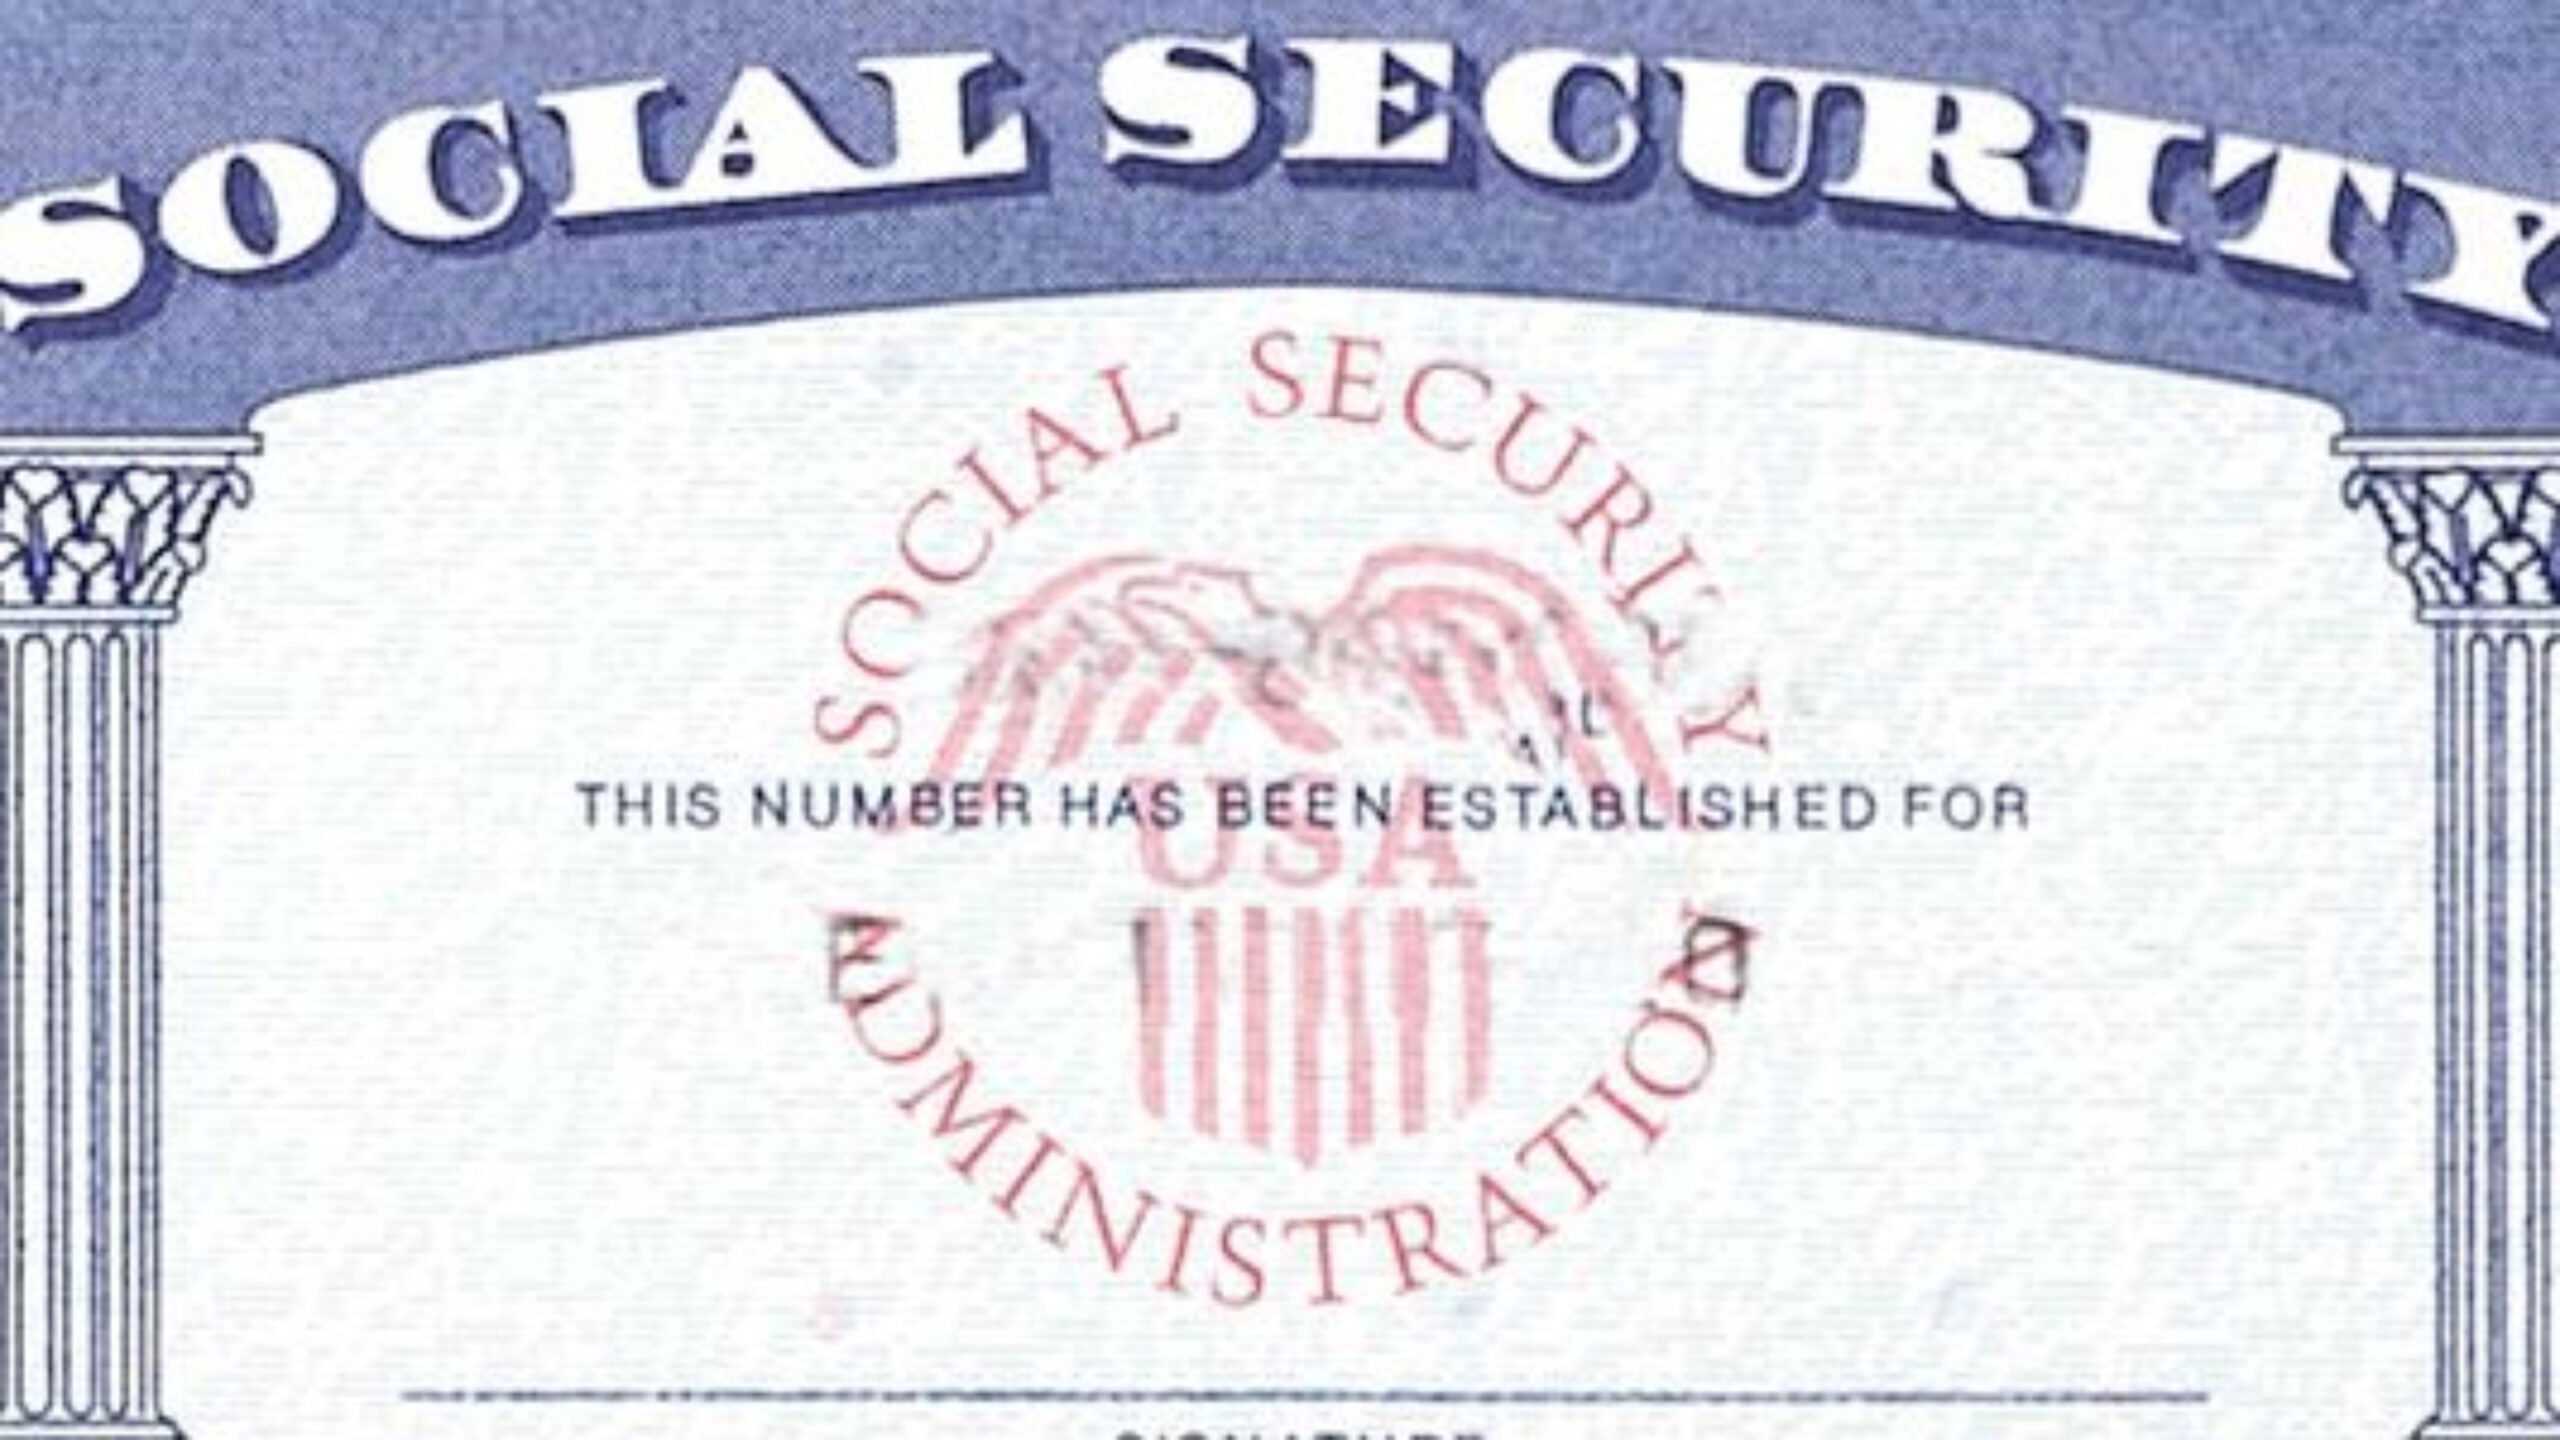 Blank Social Security Card Template Download - Great Throughout Blank Social Security Card Template Download